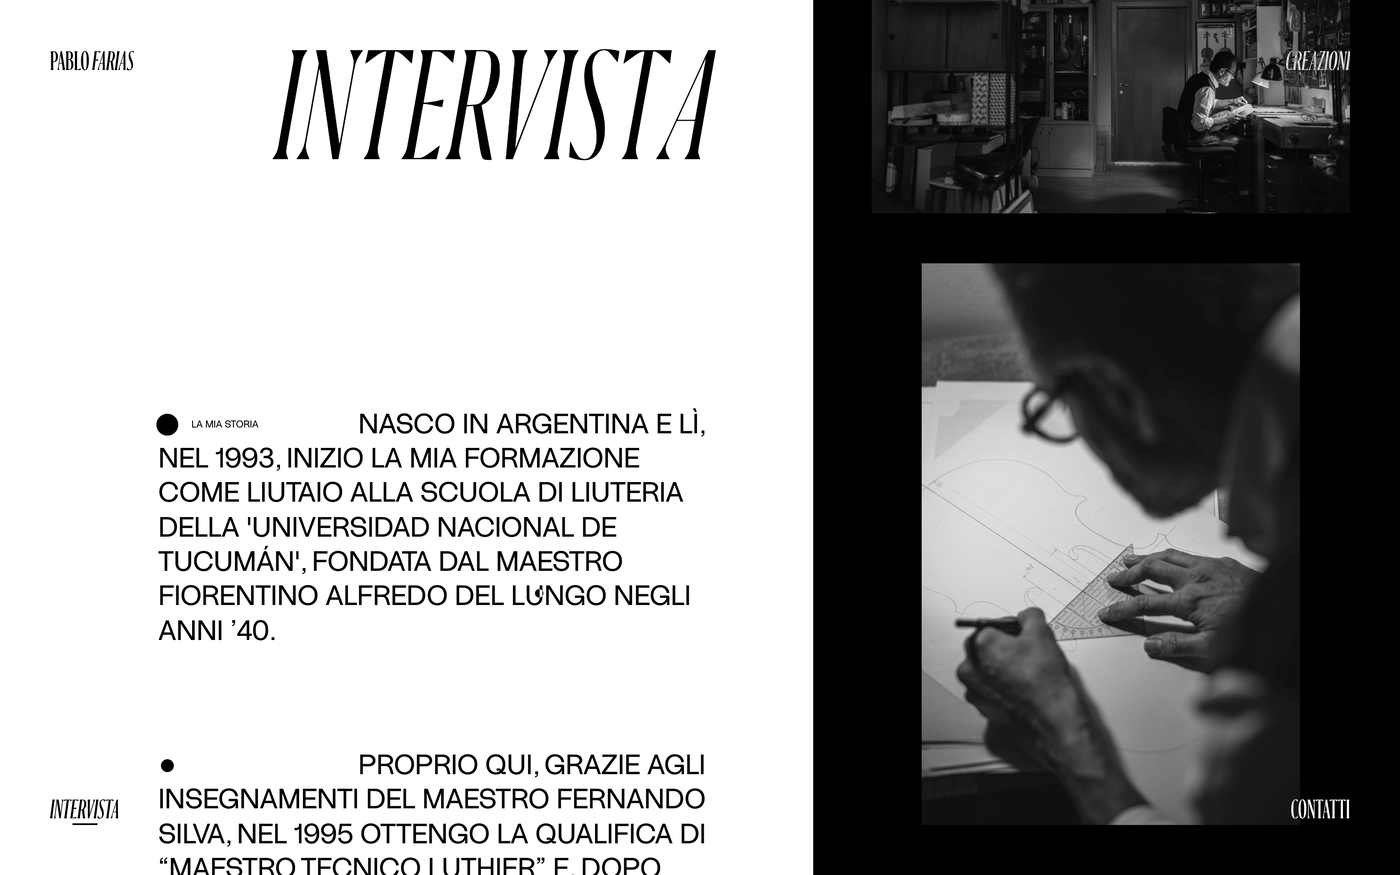 Pablo Farias website - Fonts In Use